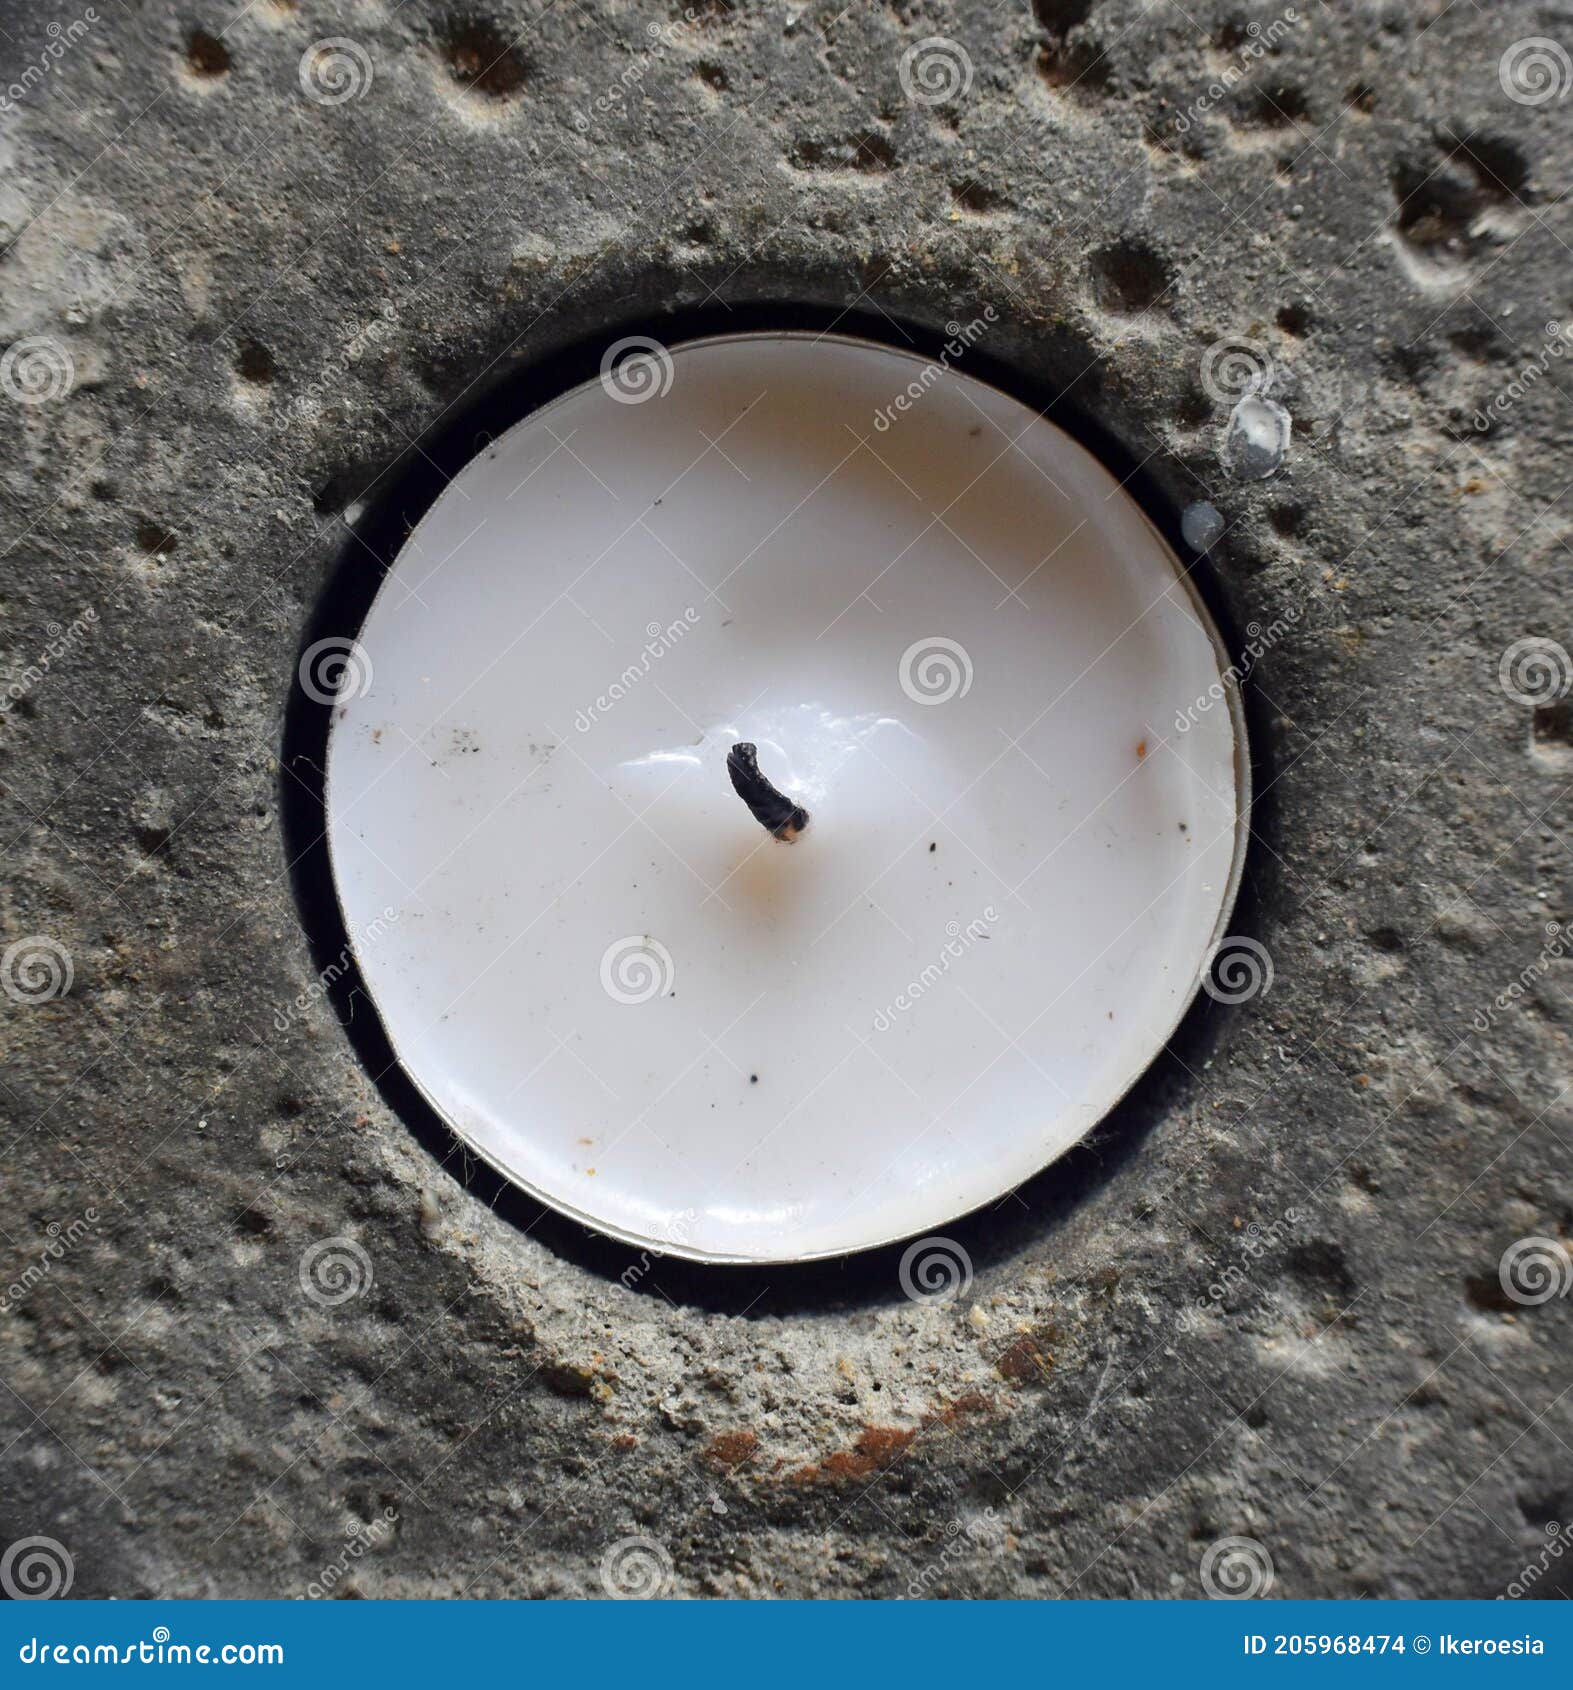 white candle in porous rock hole.